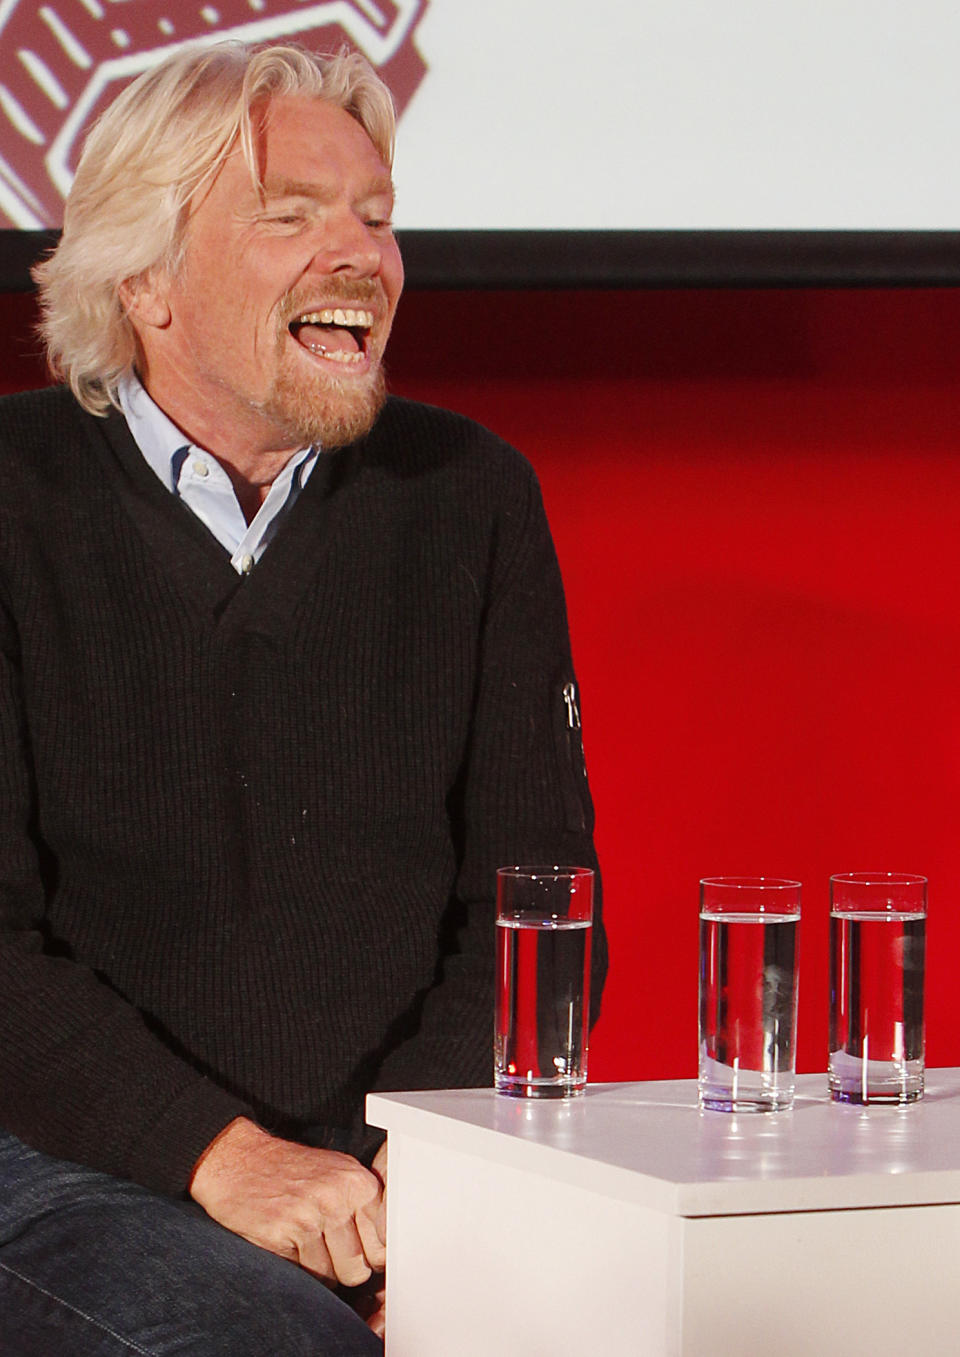 Virgin Group owner, British billionaire Richard Branson smiles to students packing a hall at Warsaw University as he tells them that they need to be "passionate about whatever you are doing in life" to achieve success during a launch of Virgin Academy, a project to help young Poles start their businesses in Warsaw, Poland, on Wednesday, Oct. 24, 2012. Branson also said that the launch of his space travel project Virgin Galactic keeps being pushed back. (AP Photo/Czarek Sokolowski)